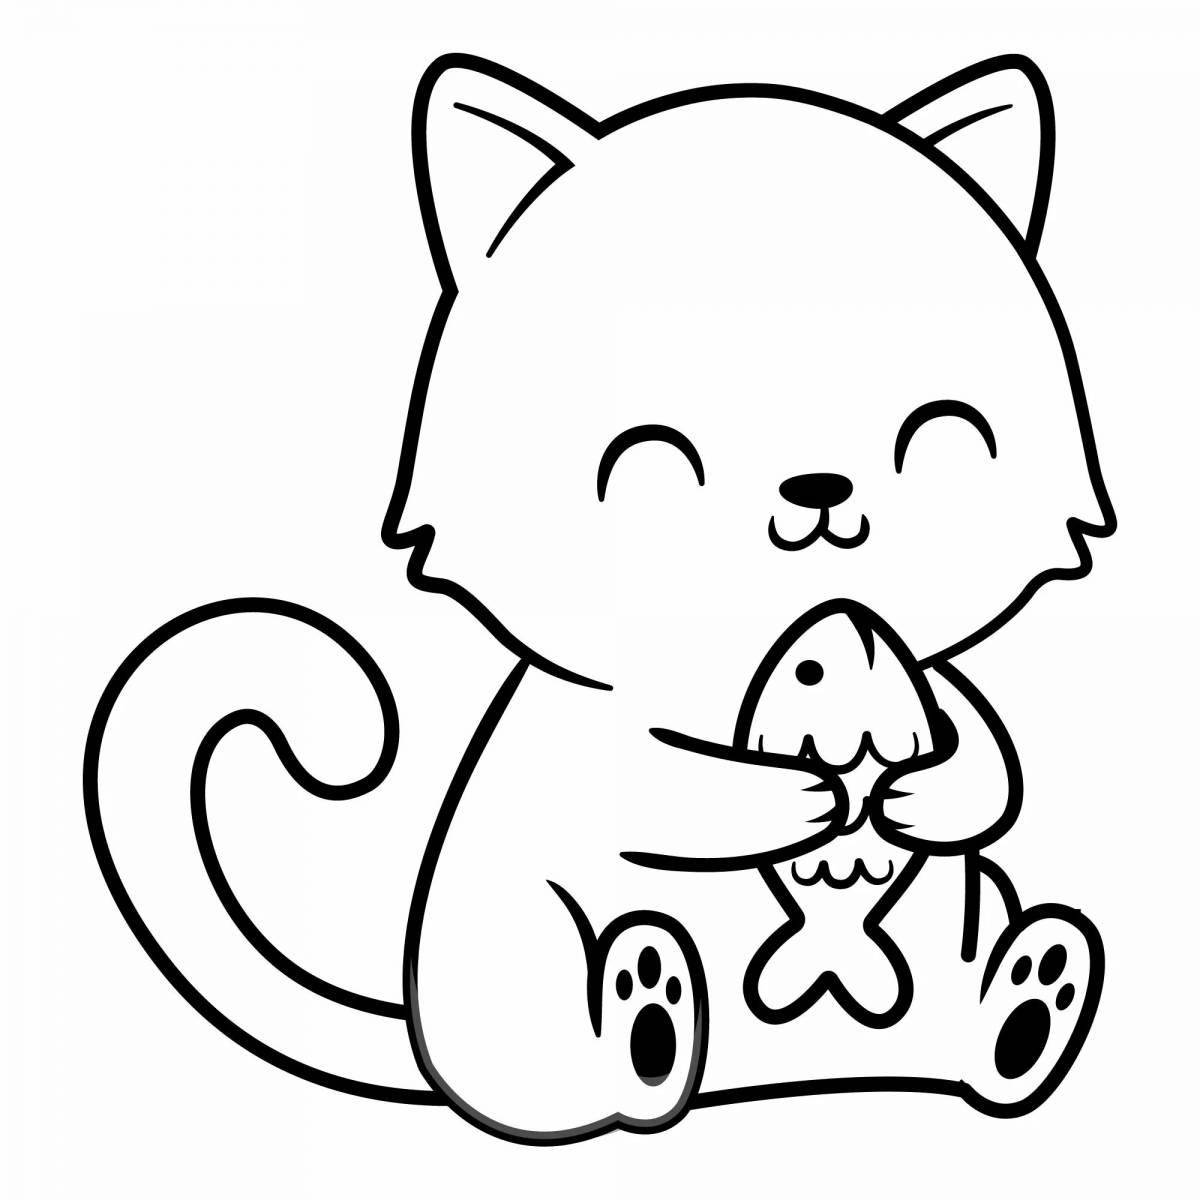 Snuggable coloring book with the cutest cat